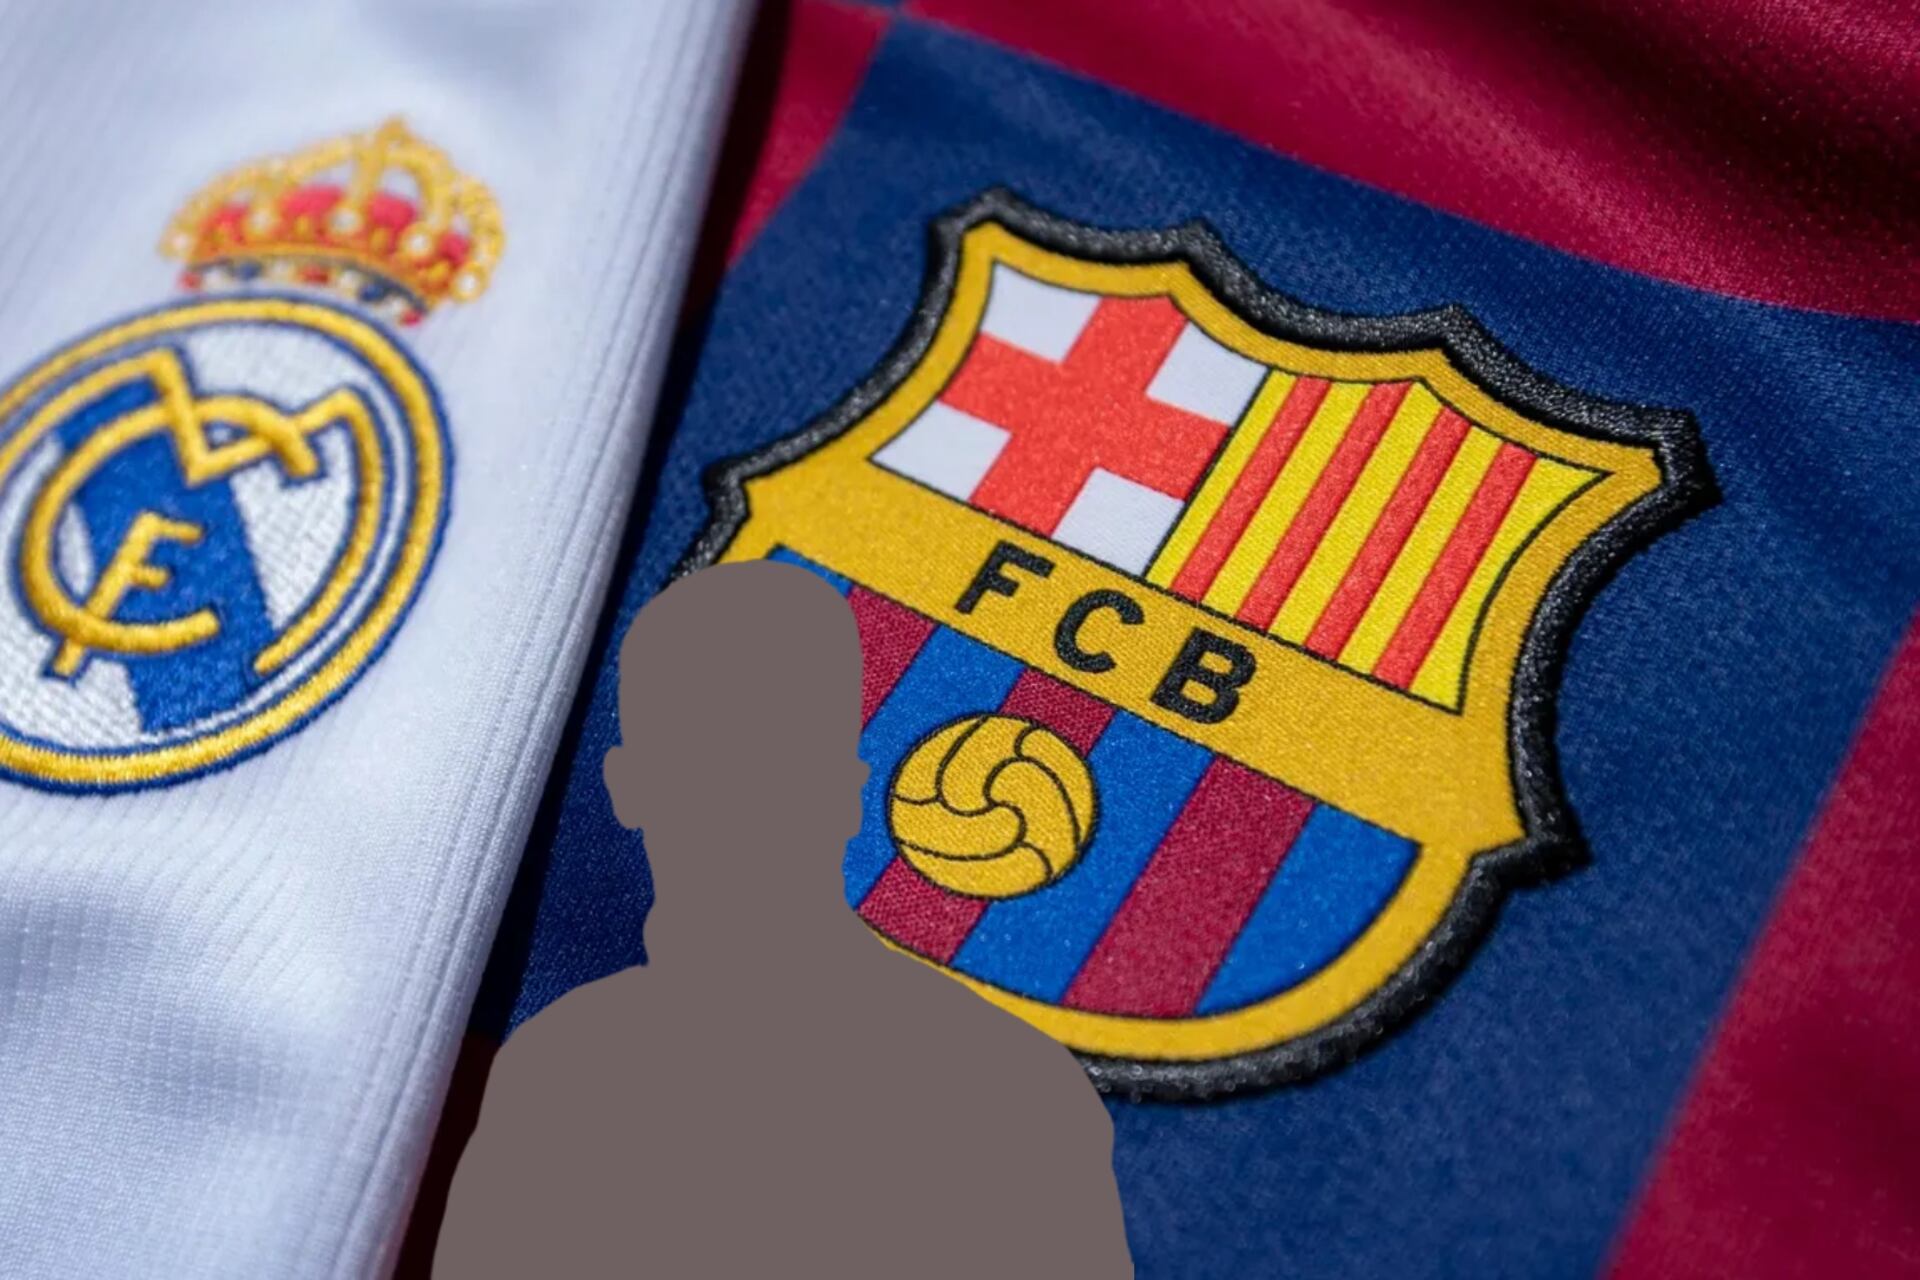 Hours before El Clasico, Barcelona's player who received threats before facing Real Madrid